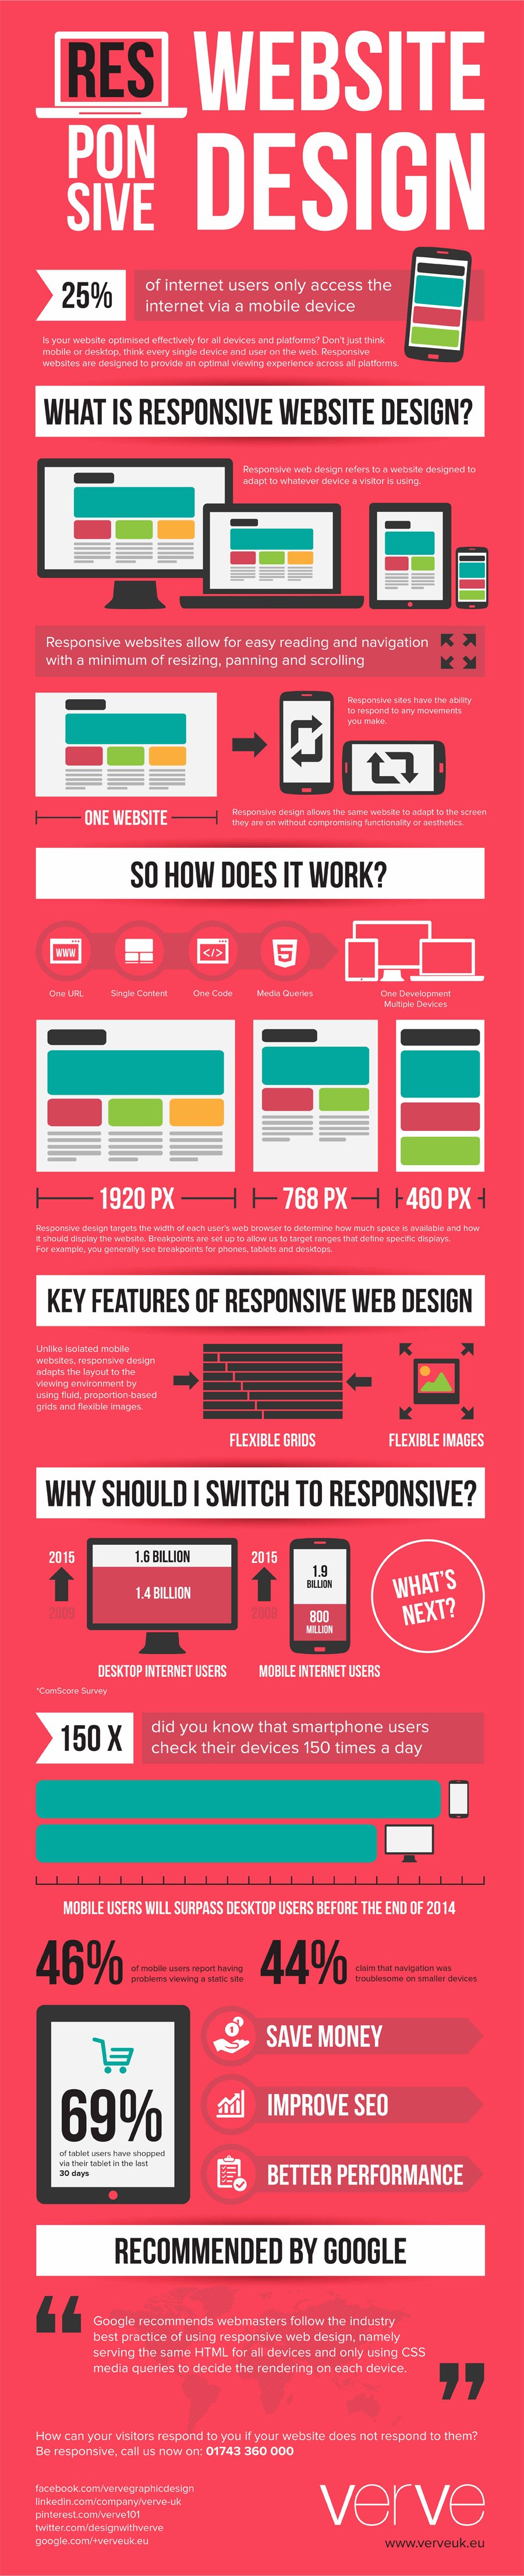 Infographic over responsive design